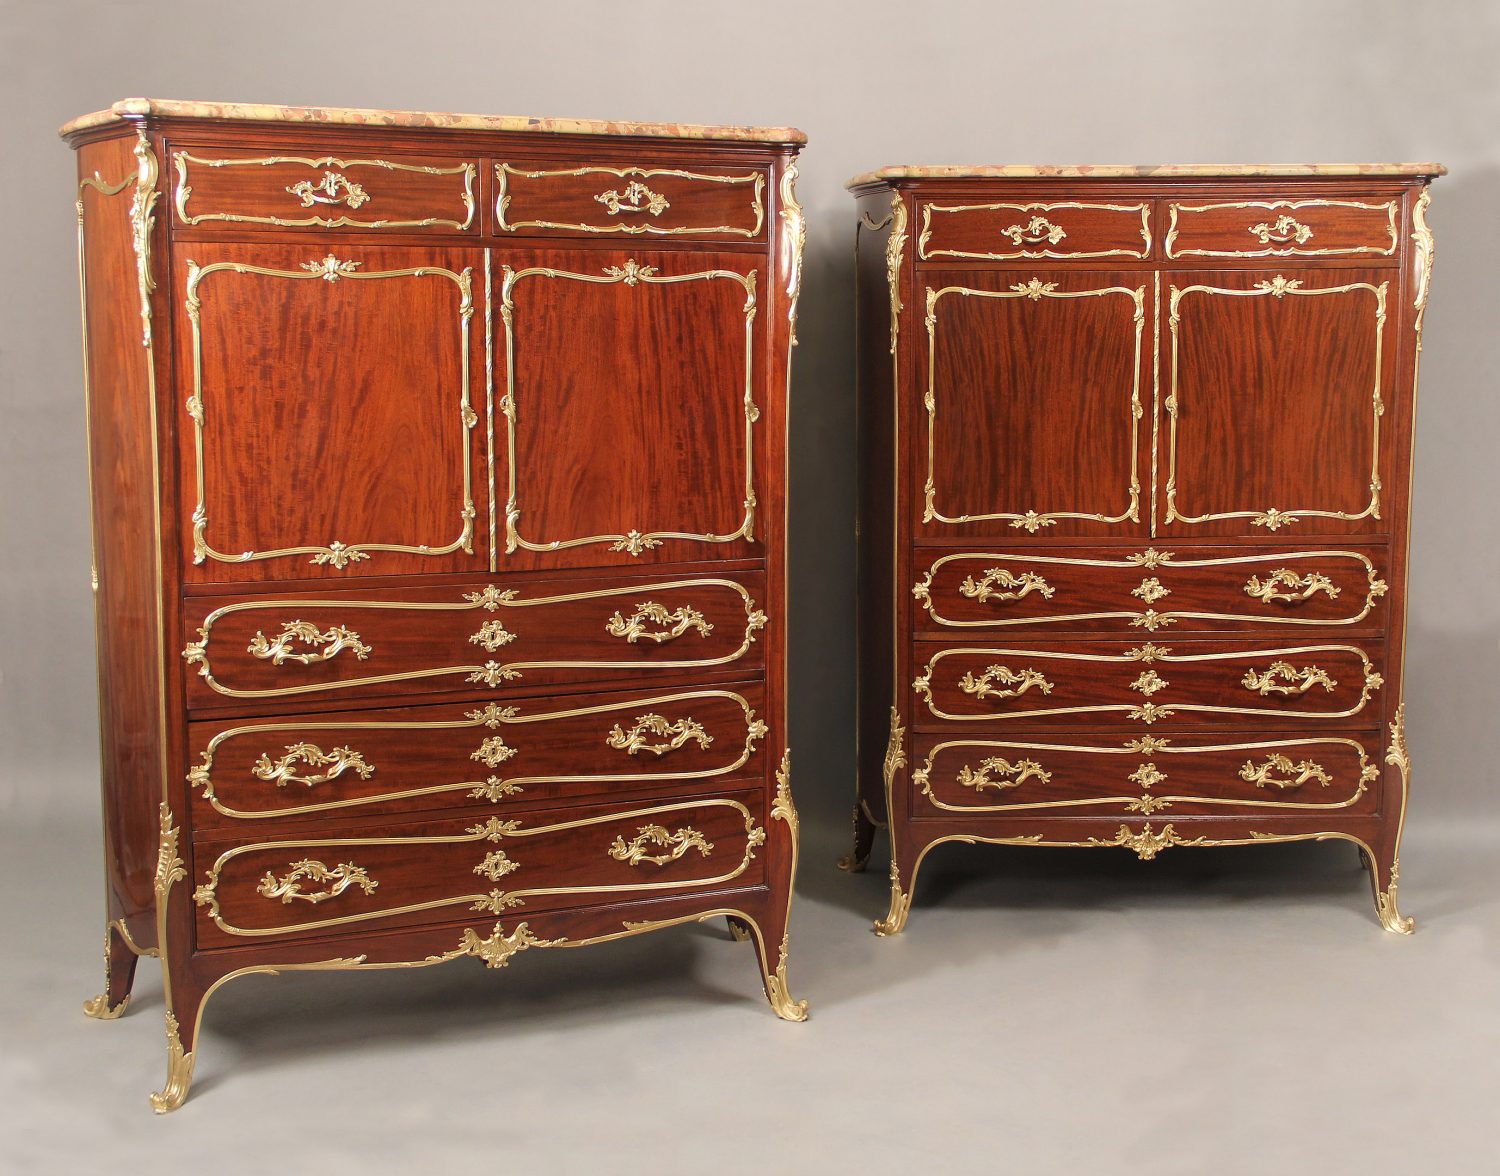 Fine Companion Pair of Early 20th Century Gilt Bronze Mounted Louis XV Style Chest of Drawers by Francois Linke